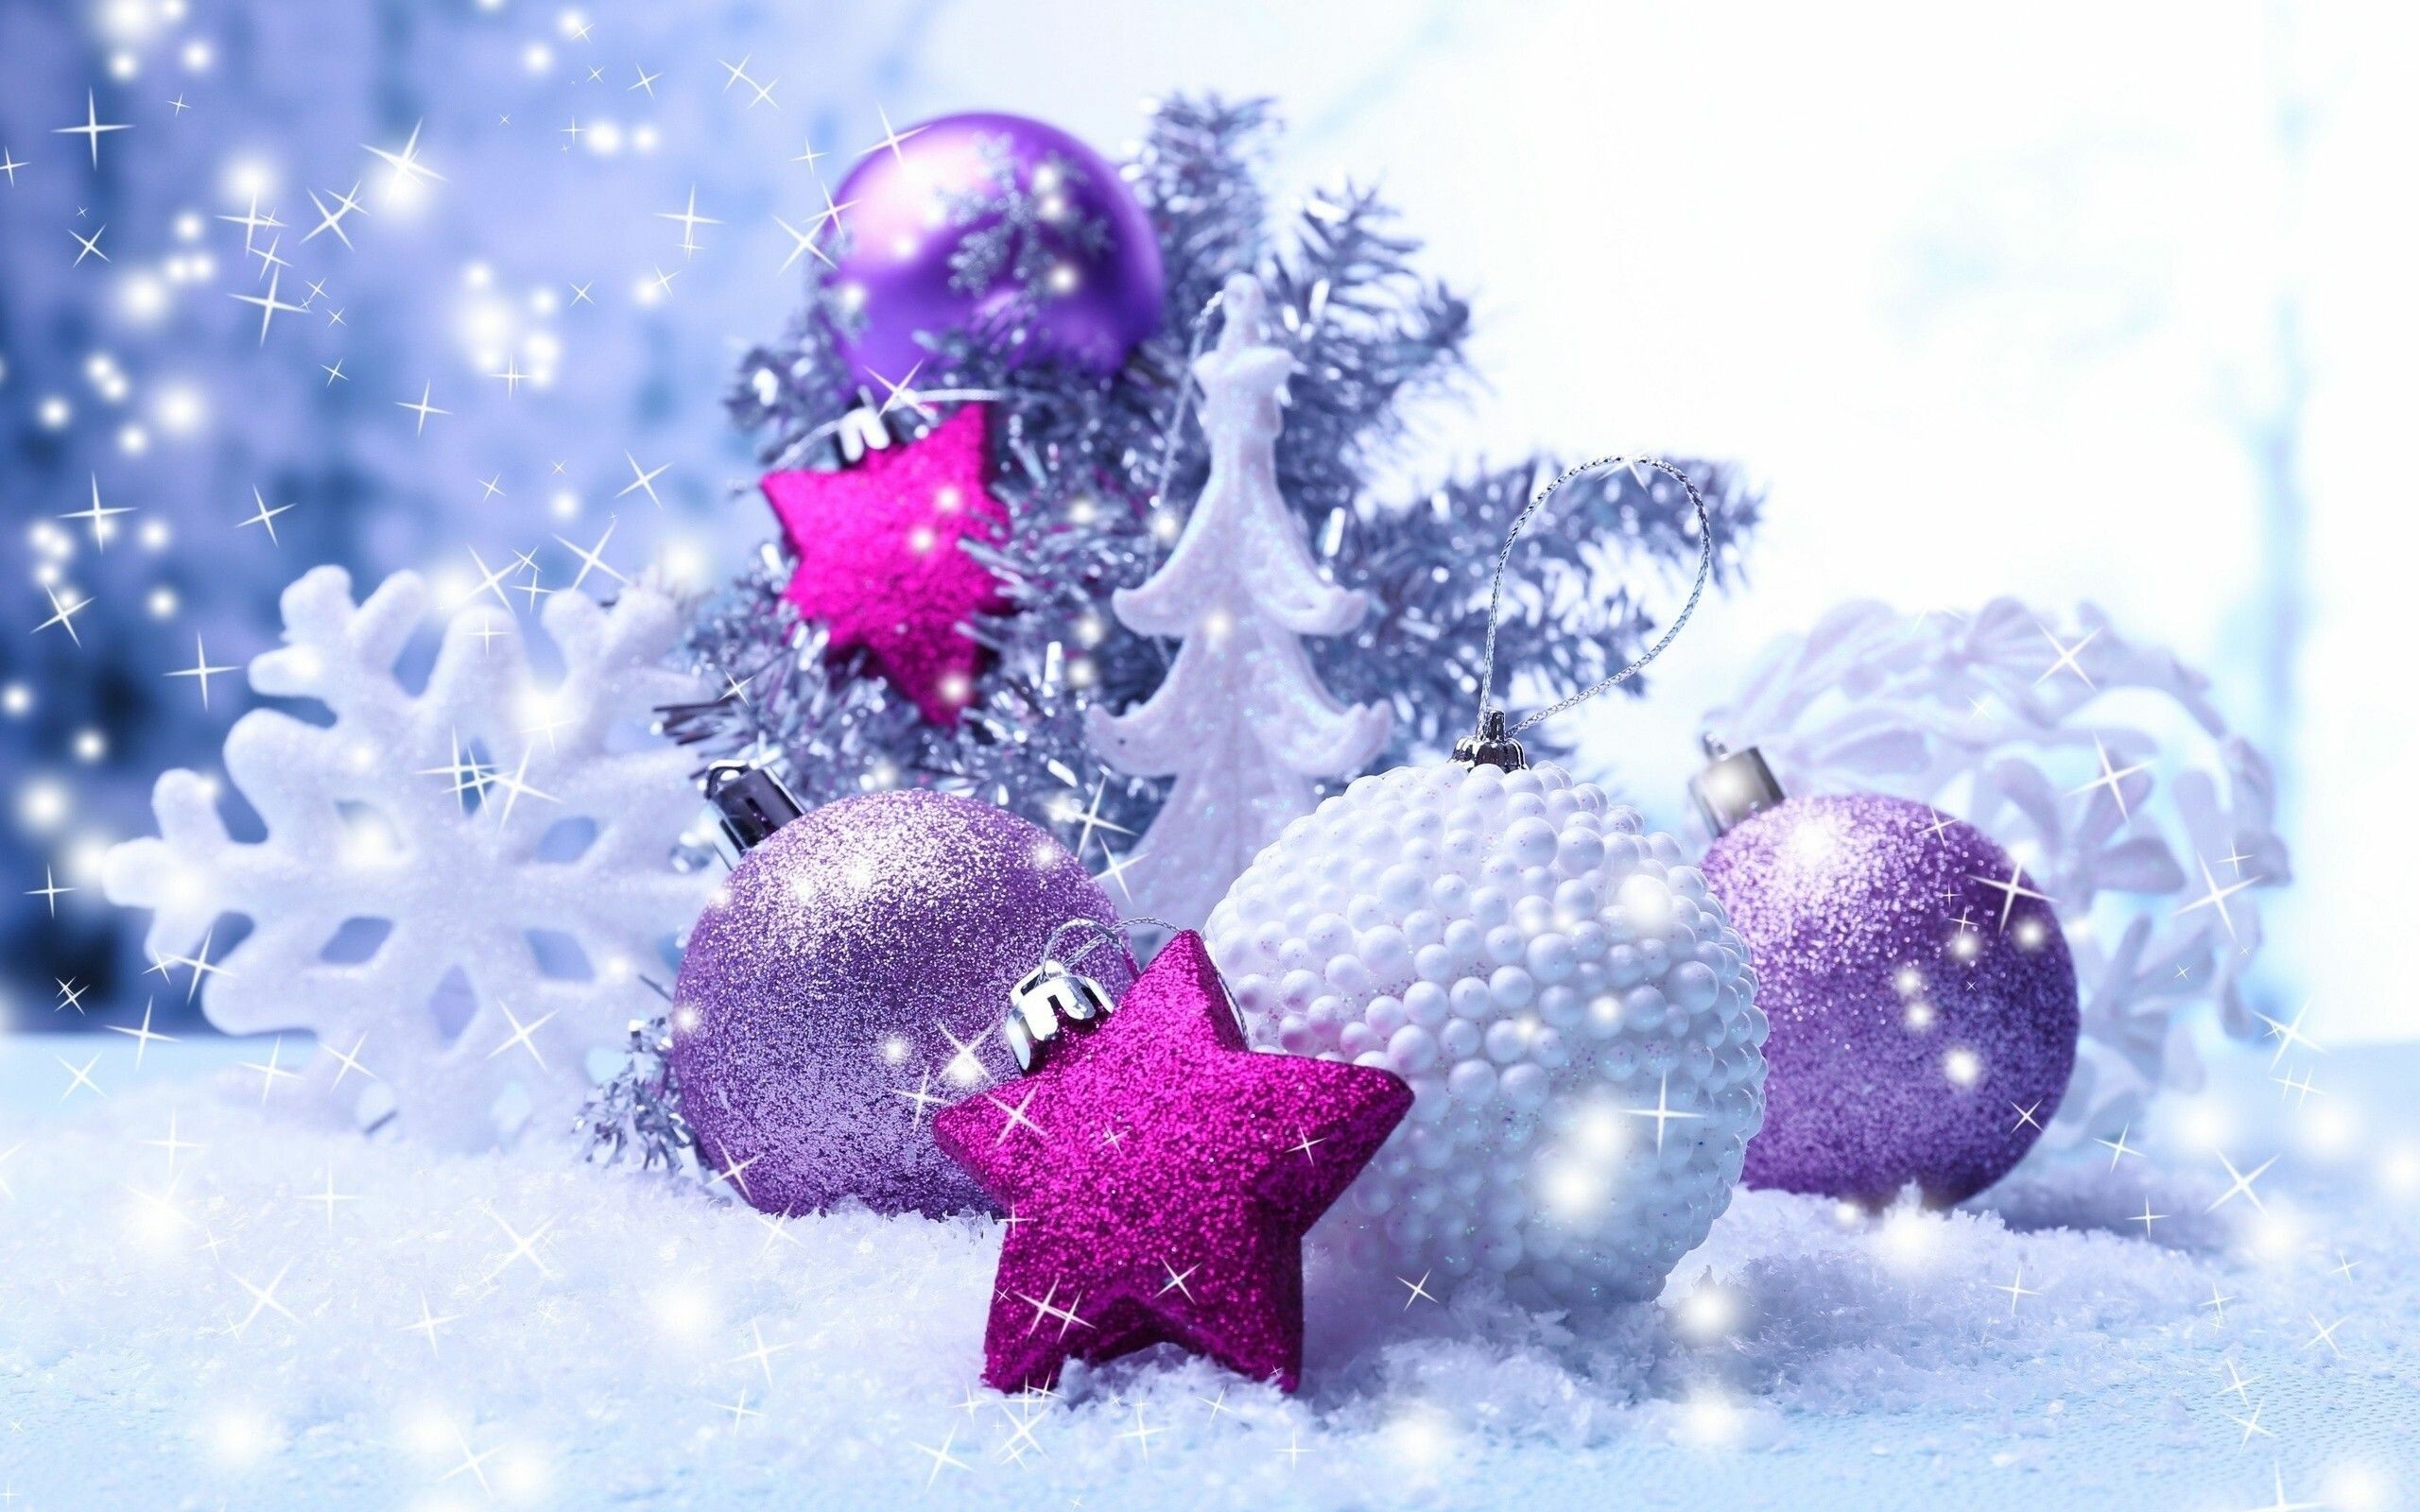 Christmas Ornament: New Year, Sparkles, Snowflakes, Stars, Bubbles. 2560x1600 HD Wallpaper.